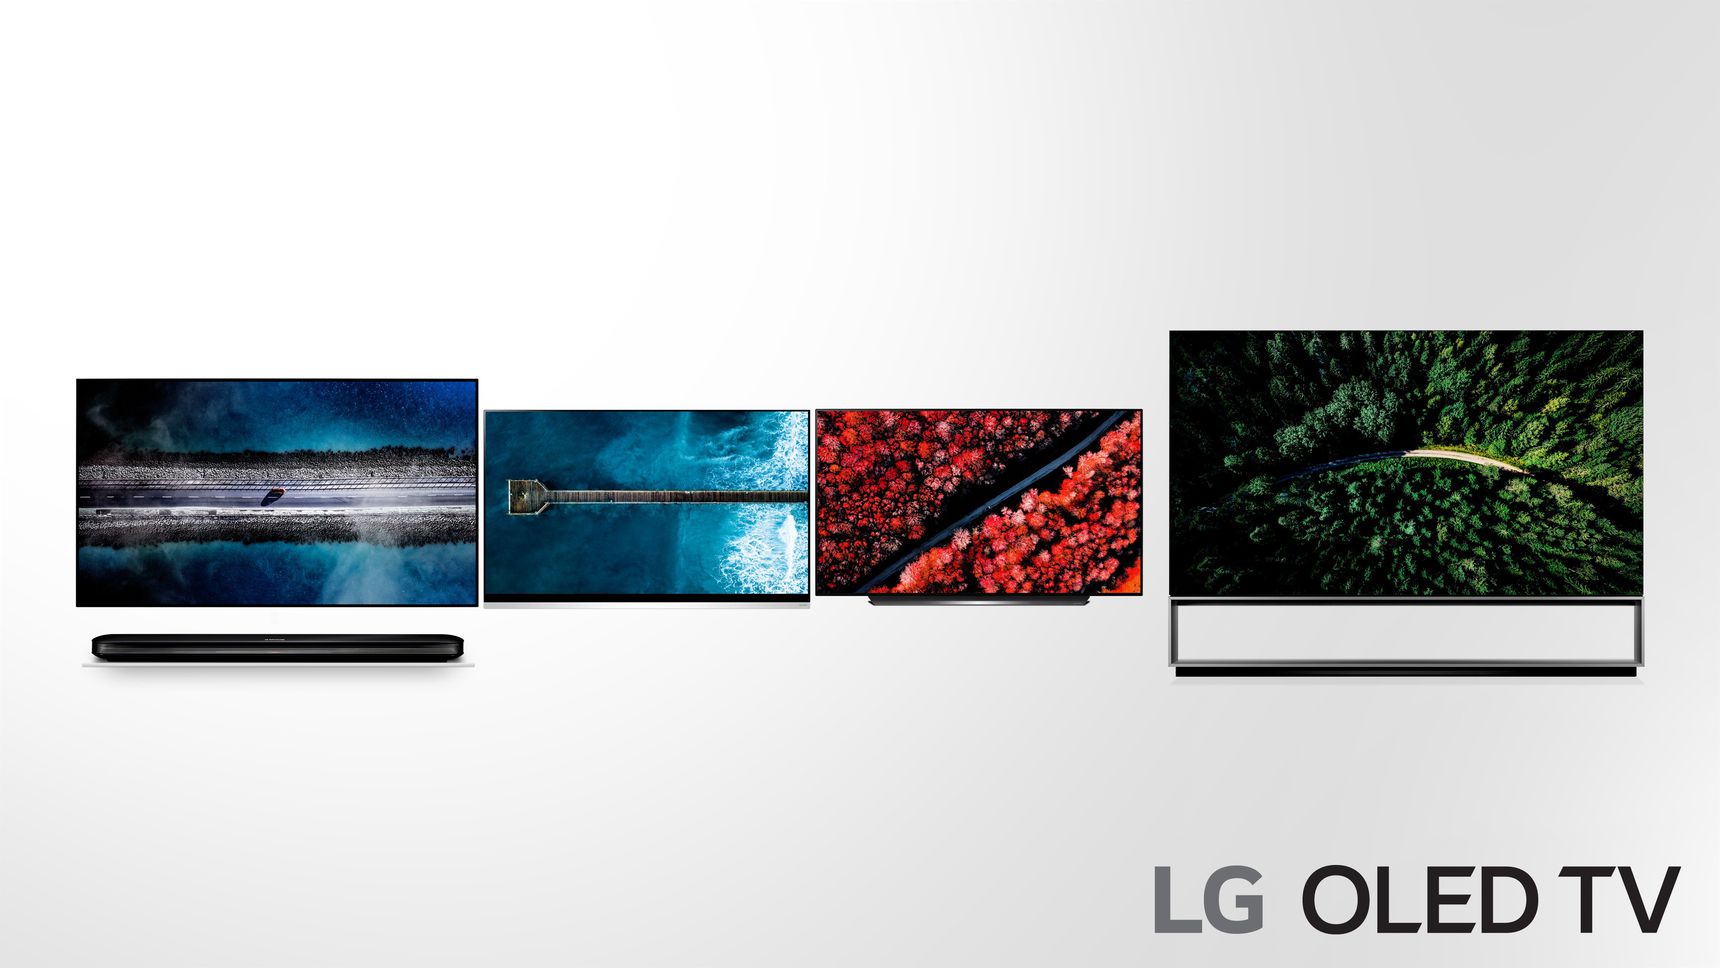 LG_OLED_TV_2019_adopting_more_powerful_AI_4_W9_E9_C9_Z9_from_the_left_side.jpg